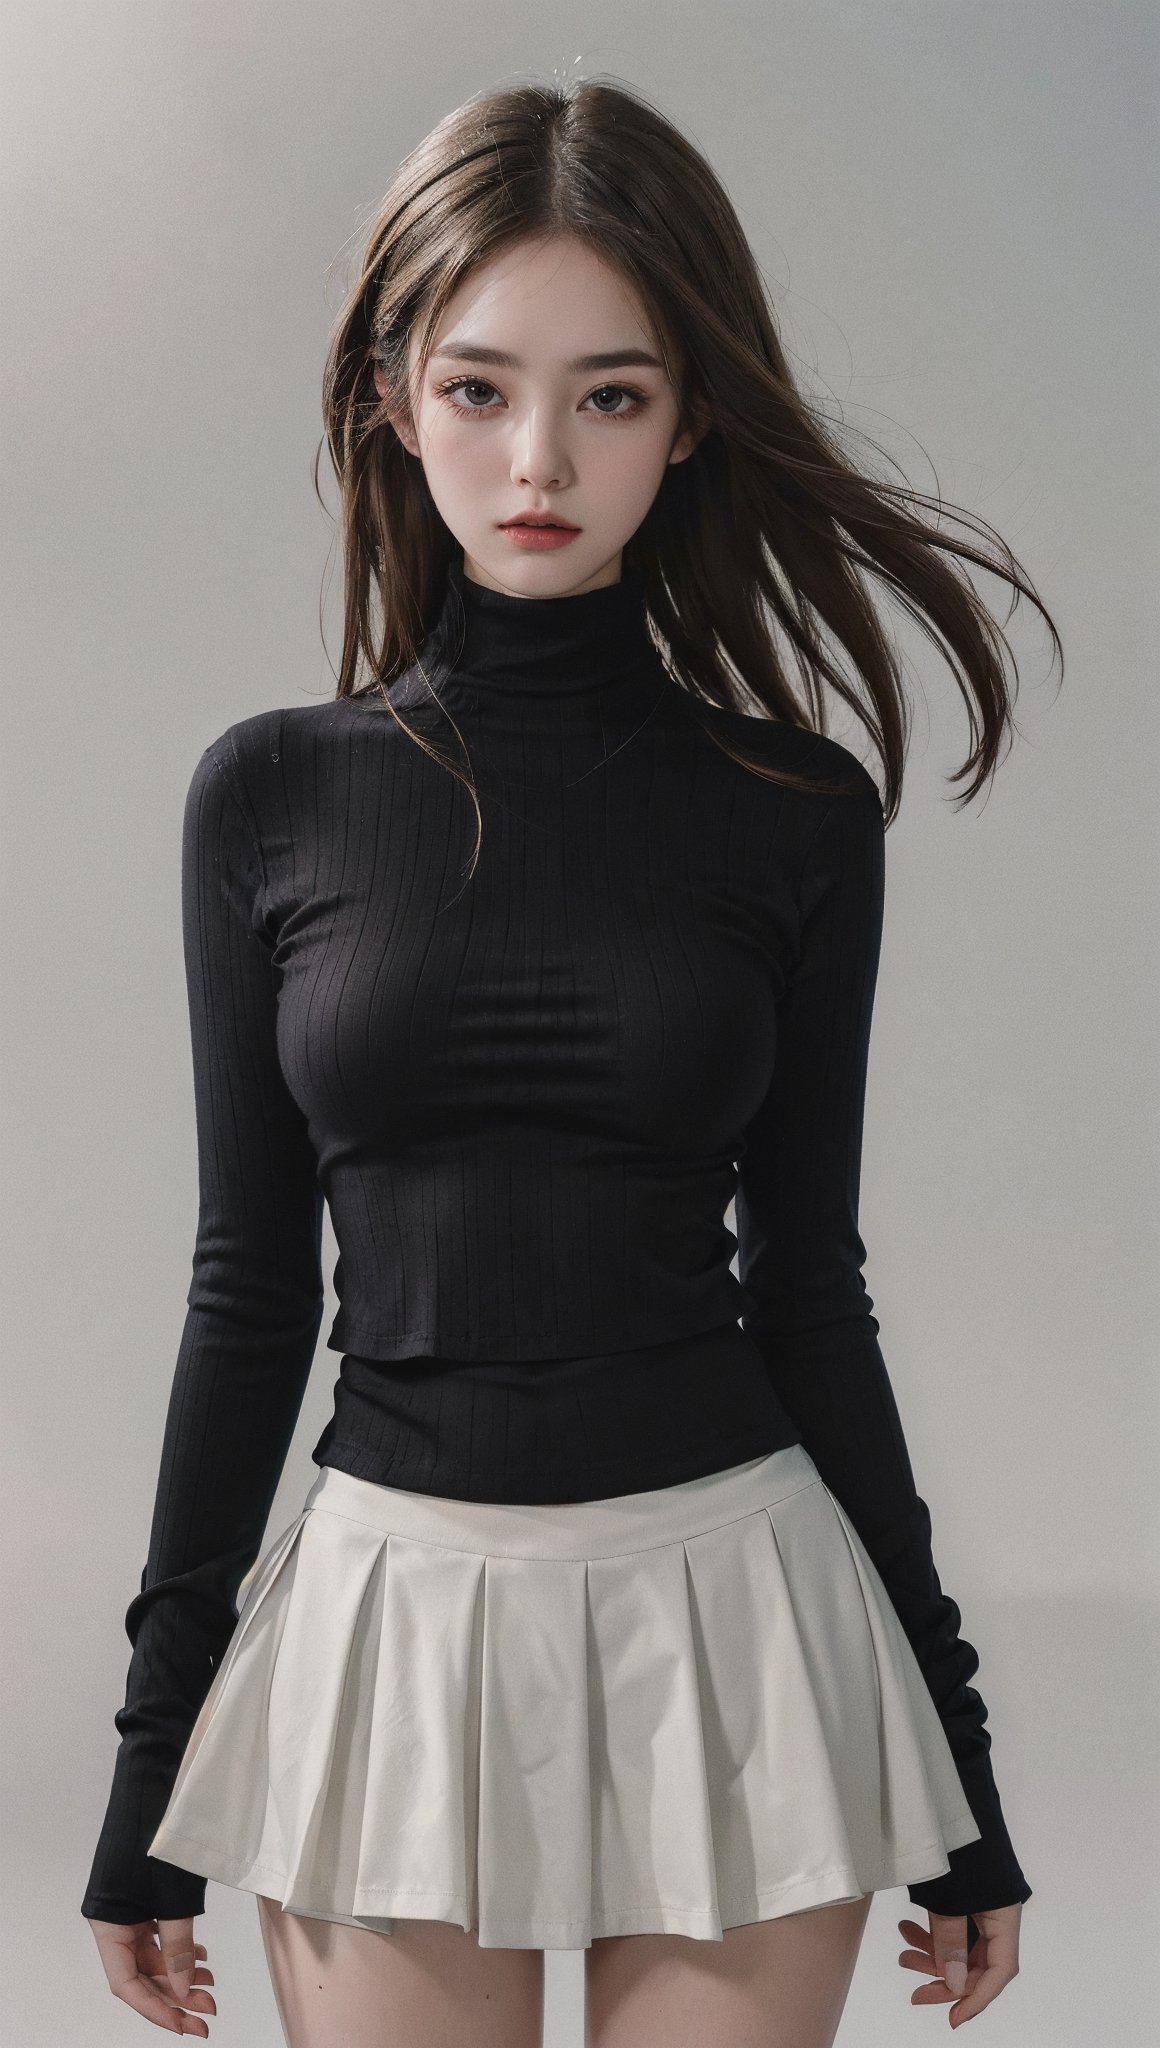 8k, best quality, masterpiece, realistic, ultra detail, photo realistic, Increase quality, look at viewer, soft expression, simple_background, gray sweeter, turtleneck, white mini skirt,fashion